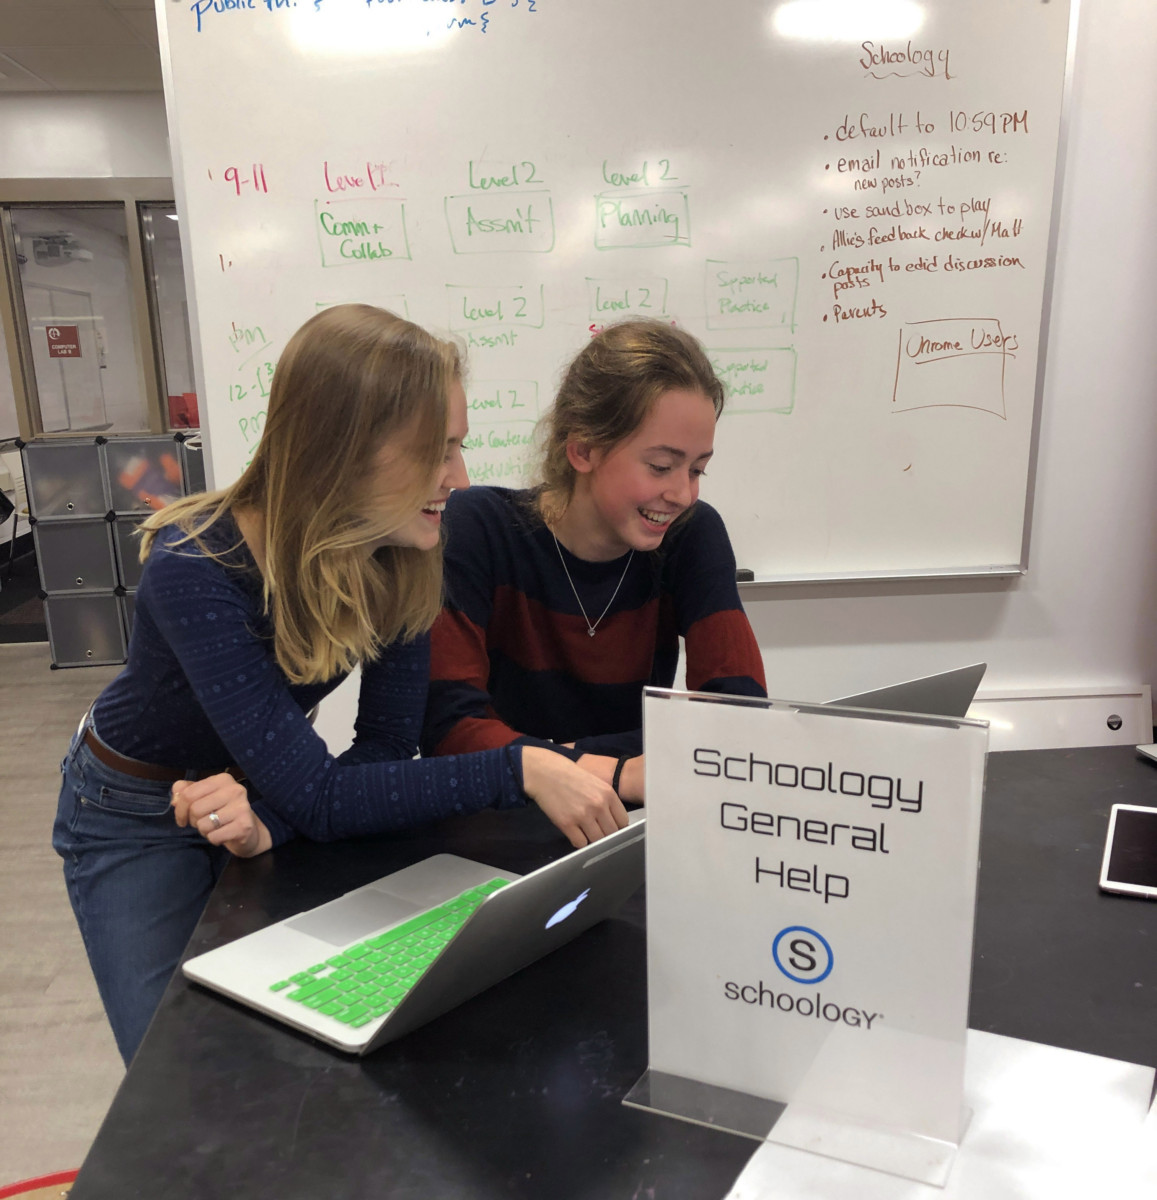 Schoology aims to provide a unified platform for classroom resources